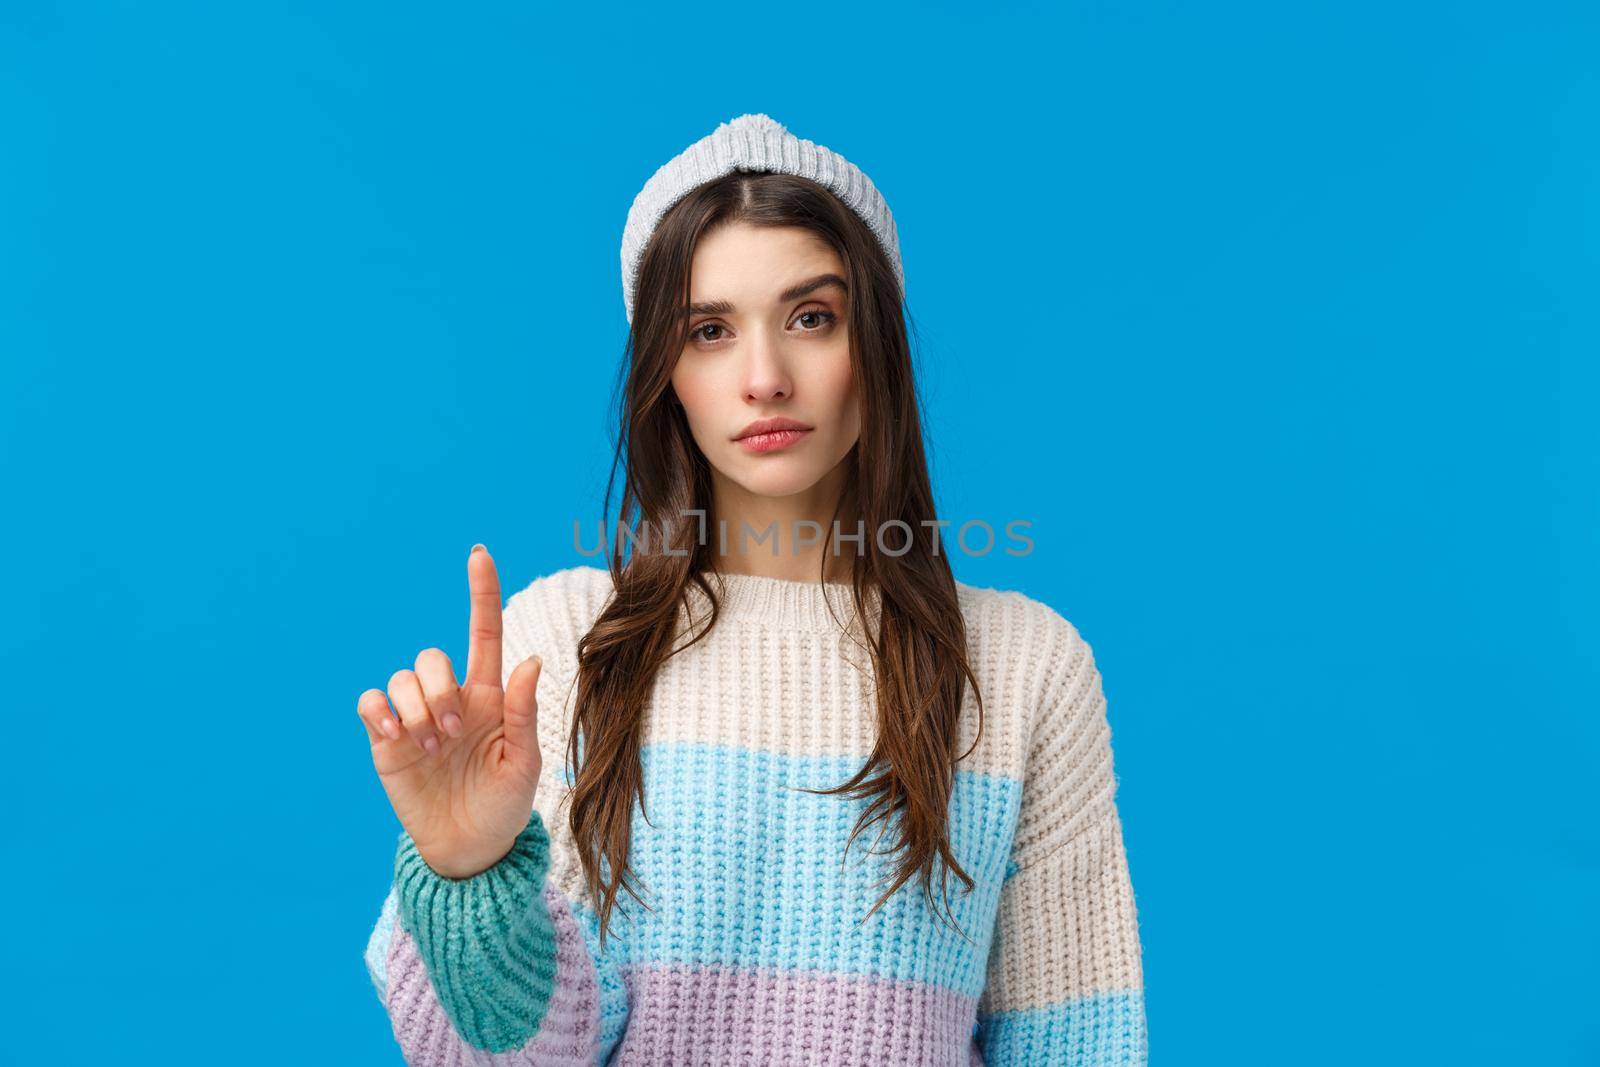 Rule number one. Serious-looking assertive woman in winter sweater, hat, raising one finger in disapproval, restriction or warning, prohibit do something, not so fast gesture, blue background.